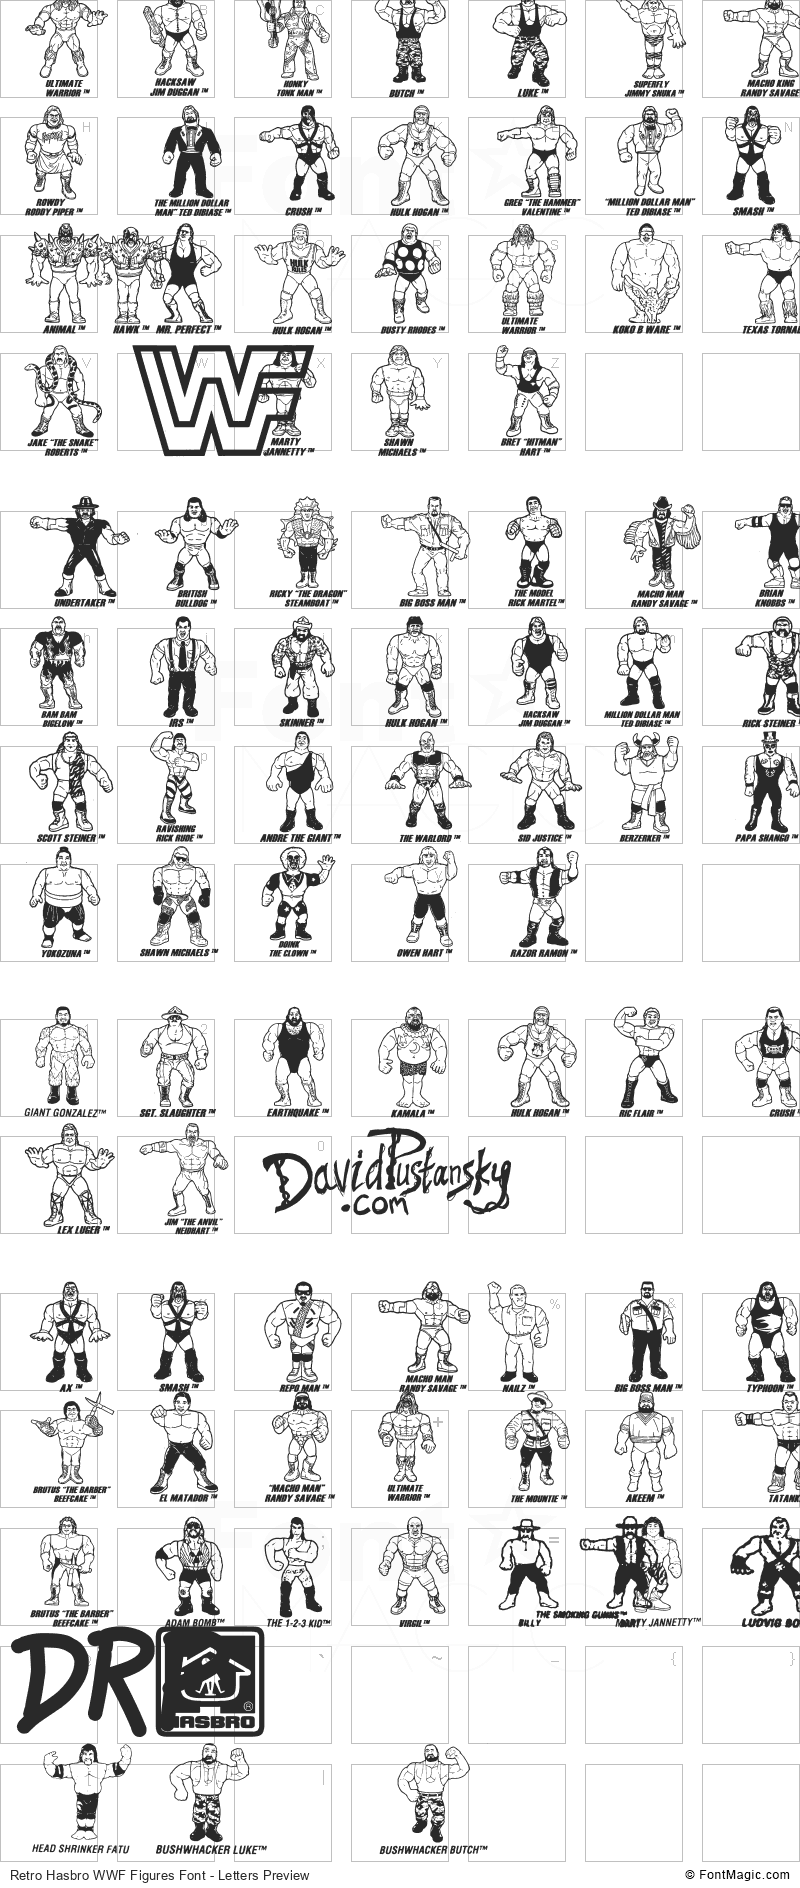 Retro Hasbro WWF Figures Font - All Latters Preview Chart